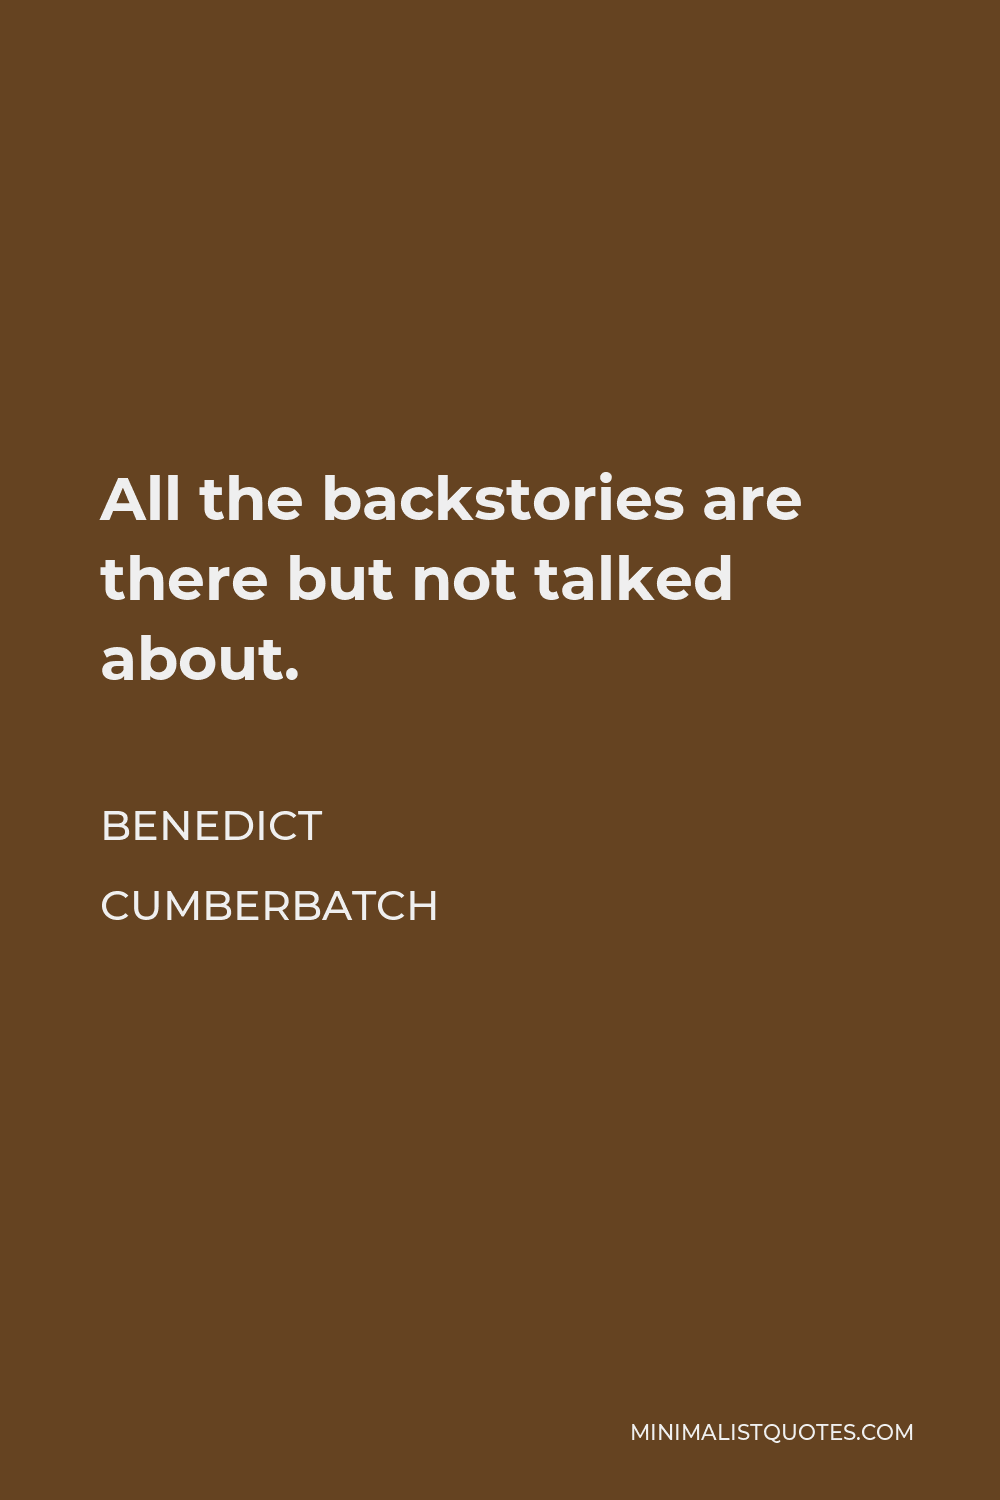 Benedict Cumberbatch Quote - All the backstories are there but not talked about.